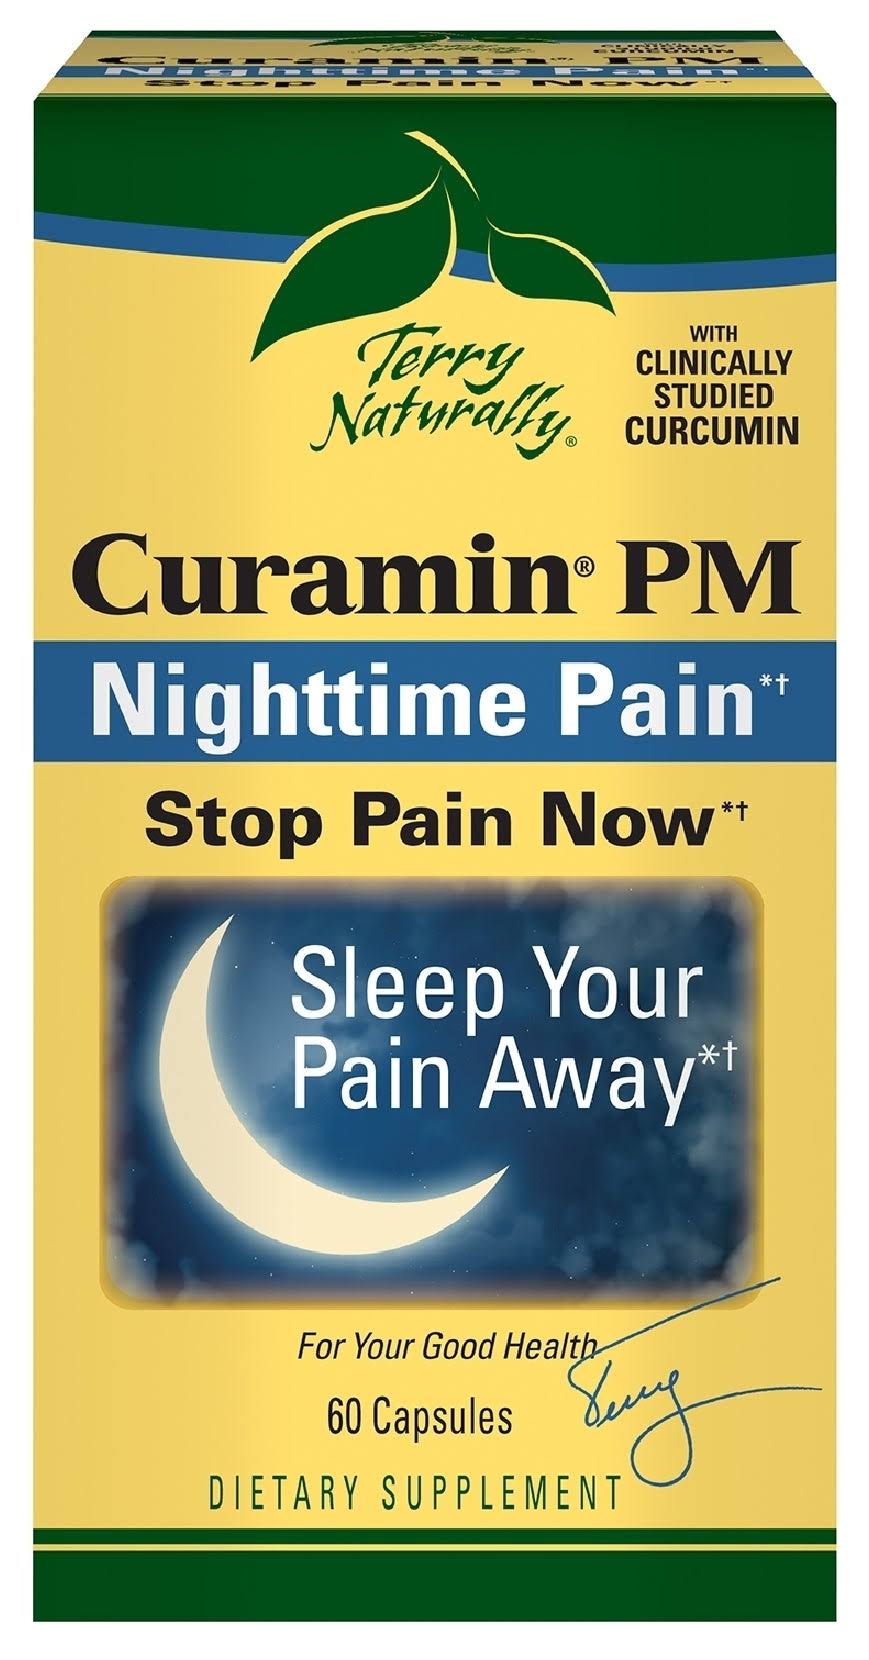 Terry Naturally Curamin PM Nighttime Pain Relief